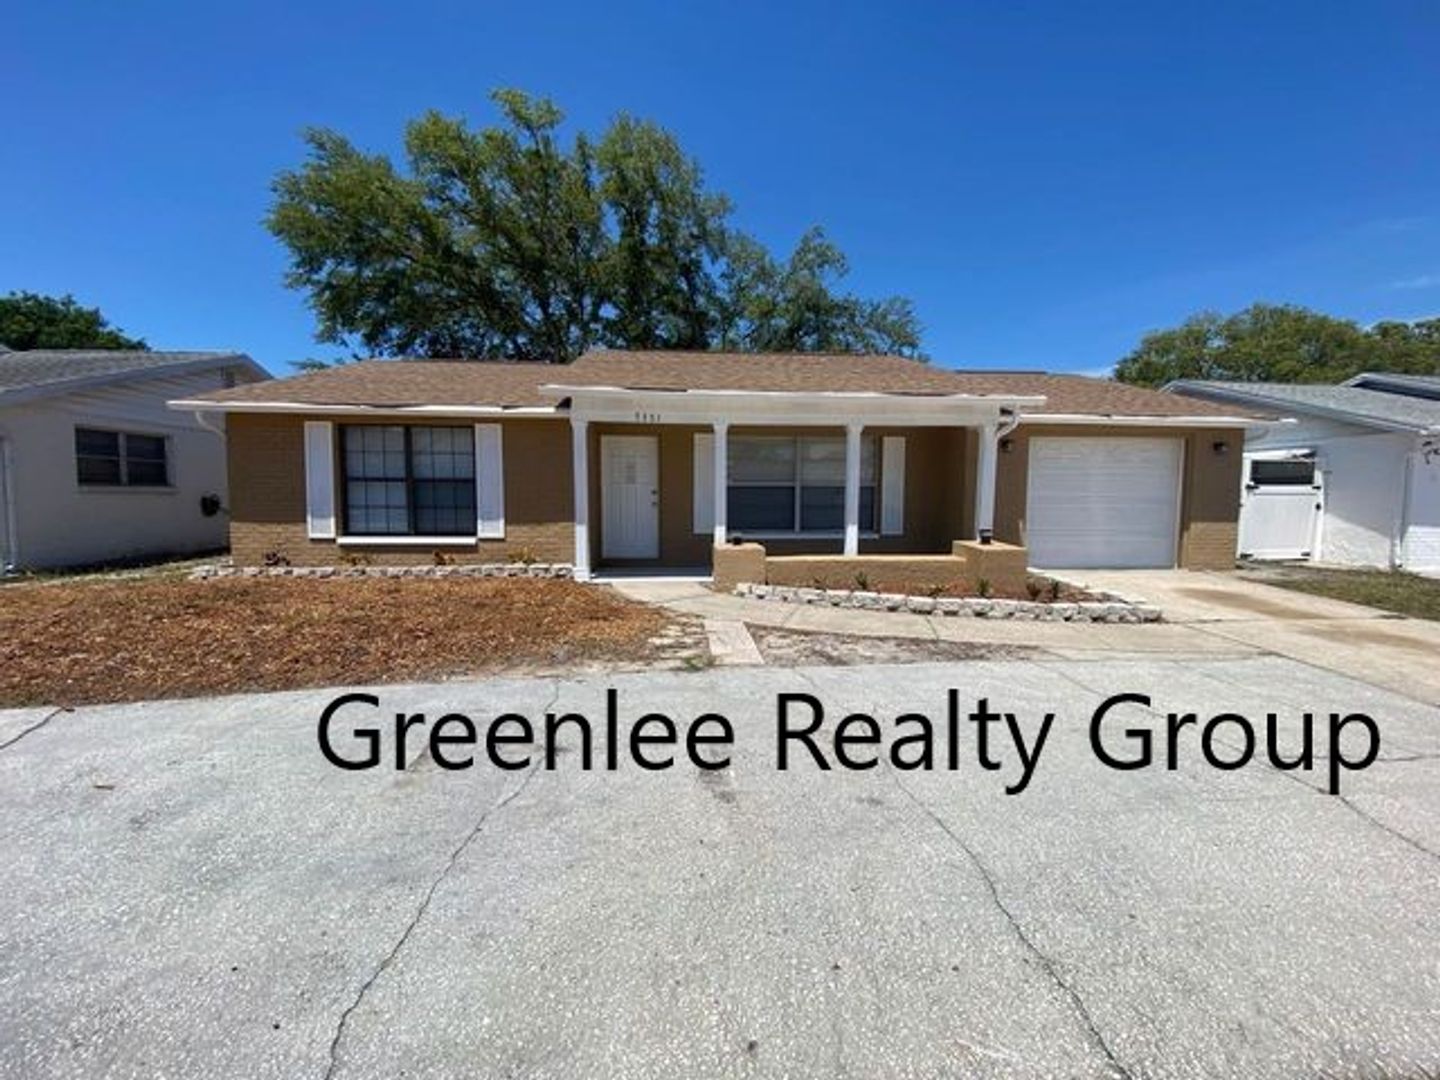 Large updated 4 bedroom 2 full bath home with large screened porch!